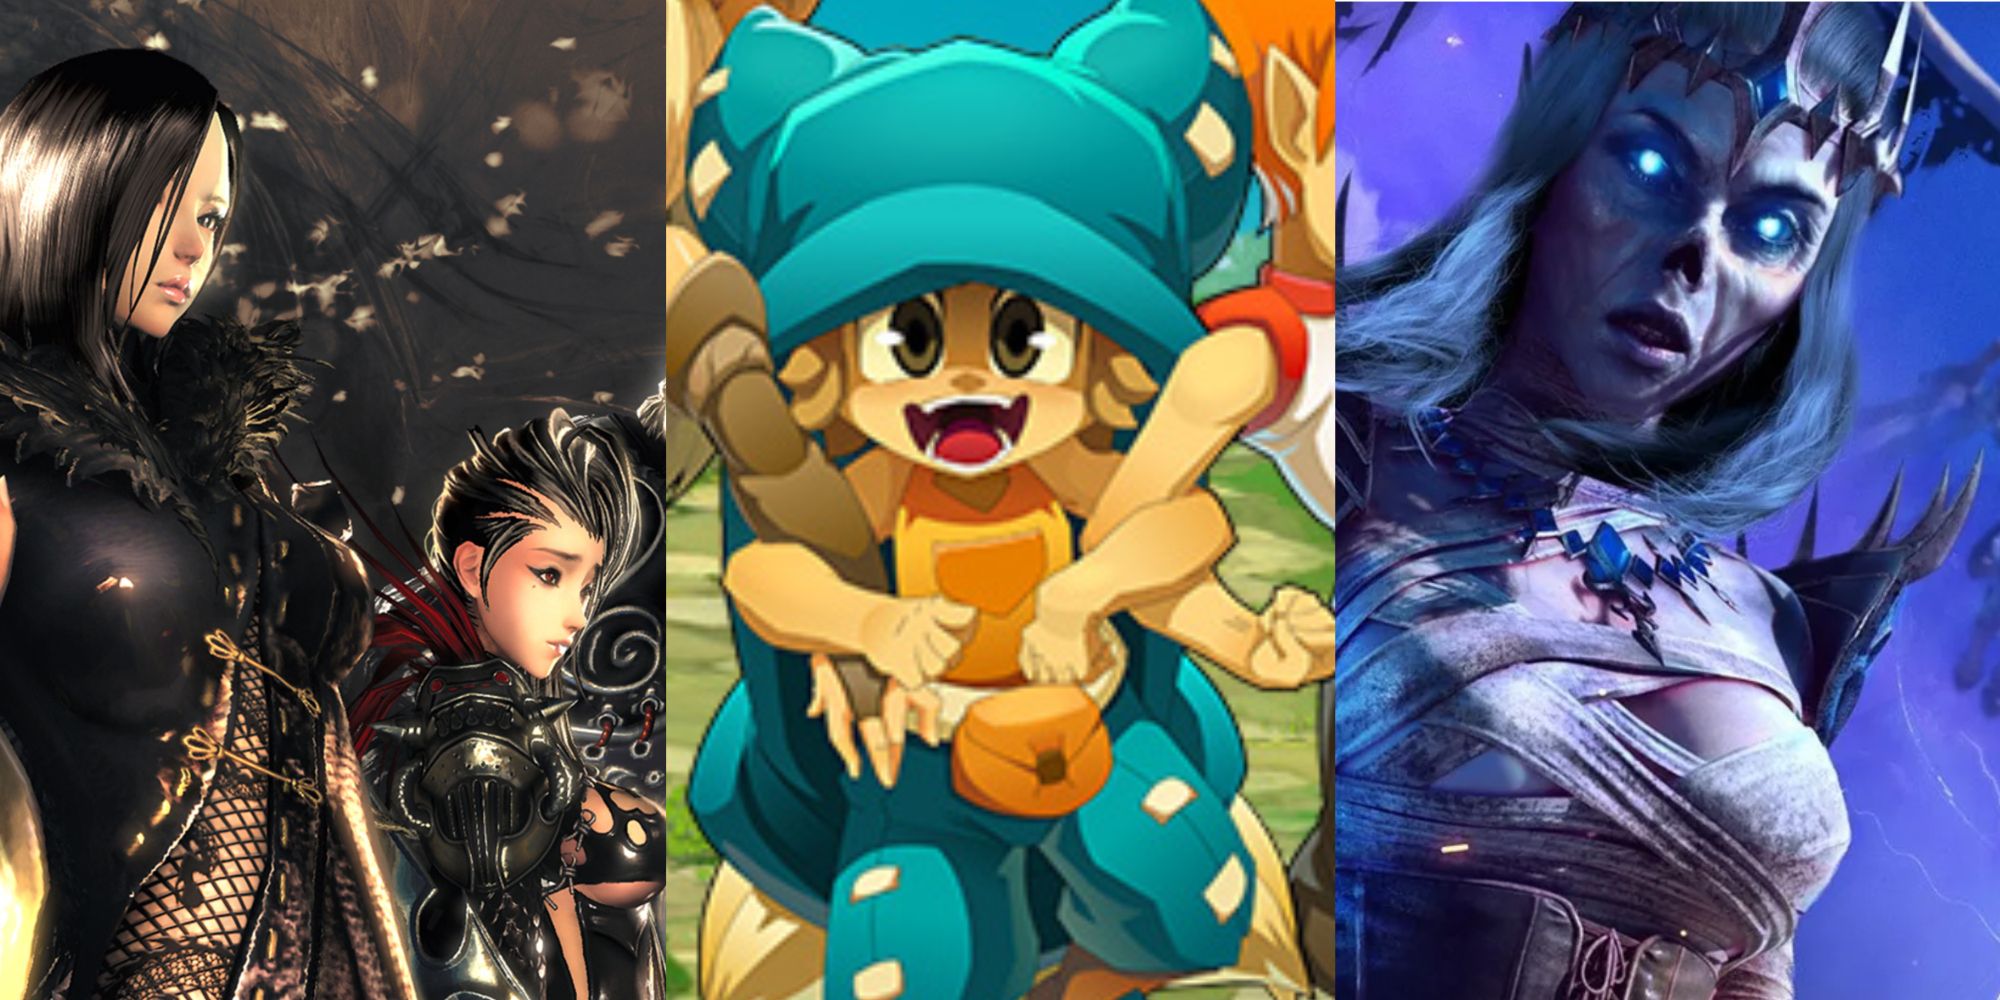 Two characters with dark hair from Soul & Blade looking to the left, a character from Wakfu grabbing their friends' arms and grinning at the viewer, and a character with glowing blue eyes and a skeletal nose from Neverwinter looking at the viewer